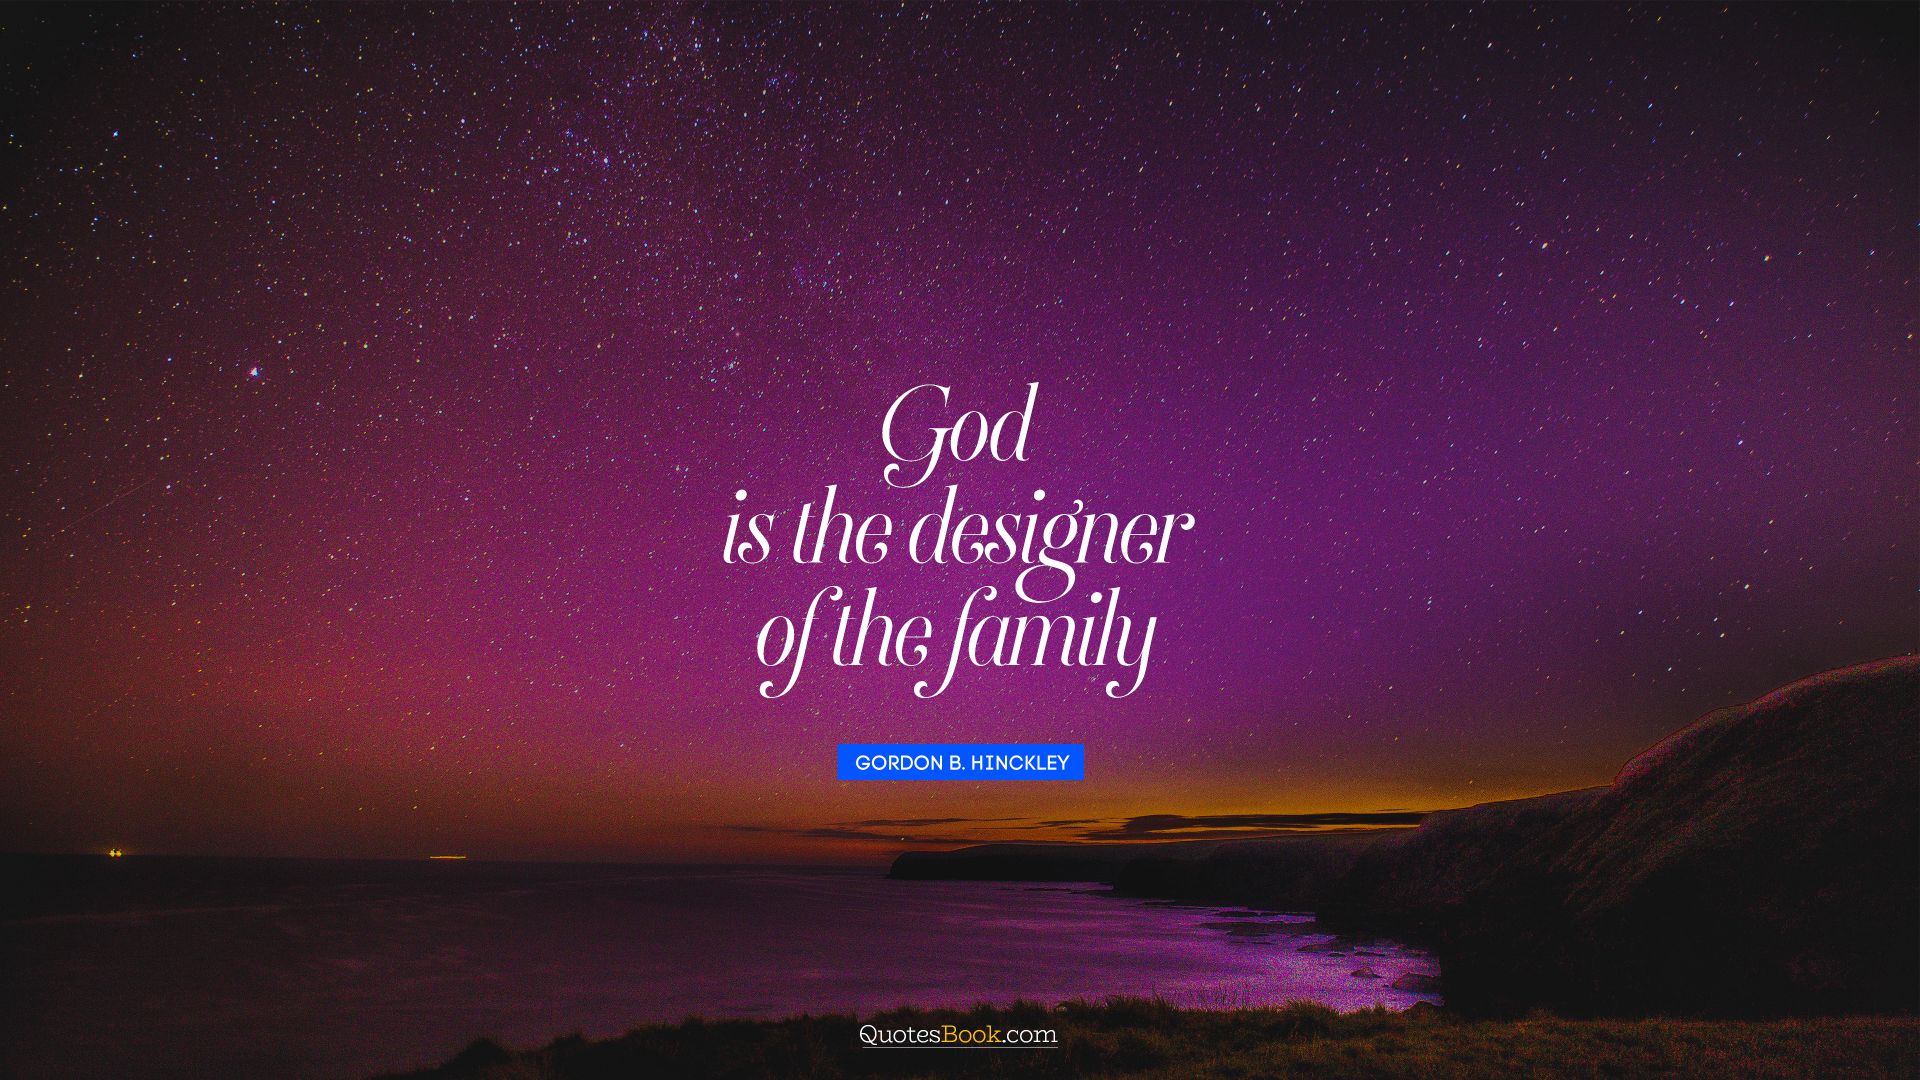 God is the designer of the family. - Quote by Gordon B. Hinckley